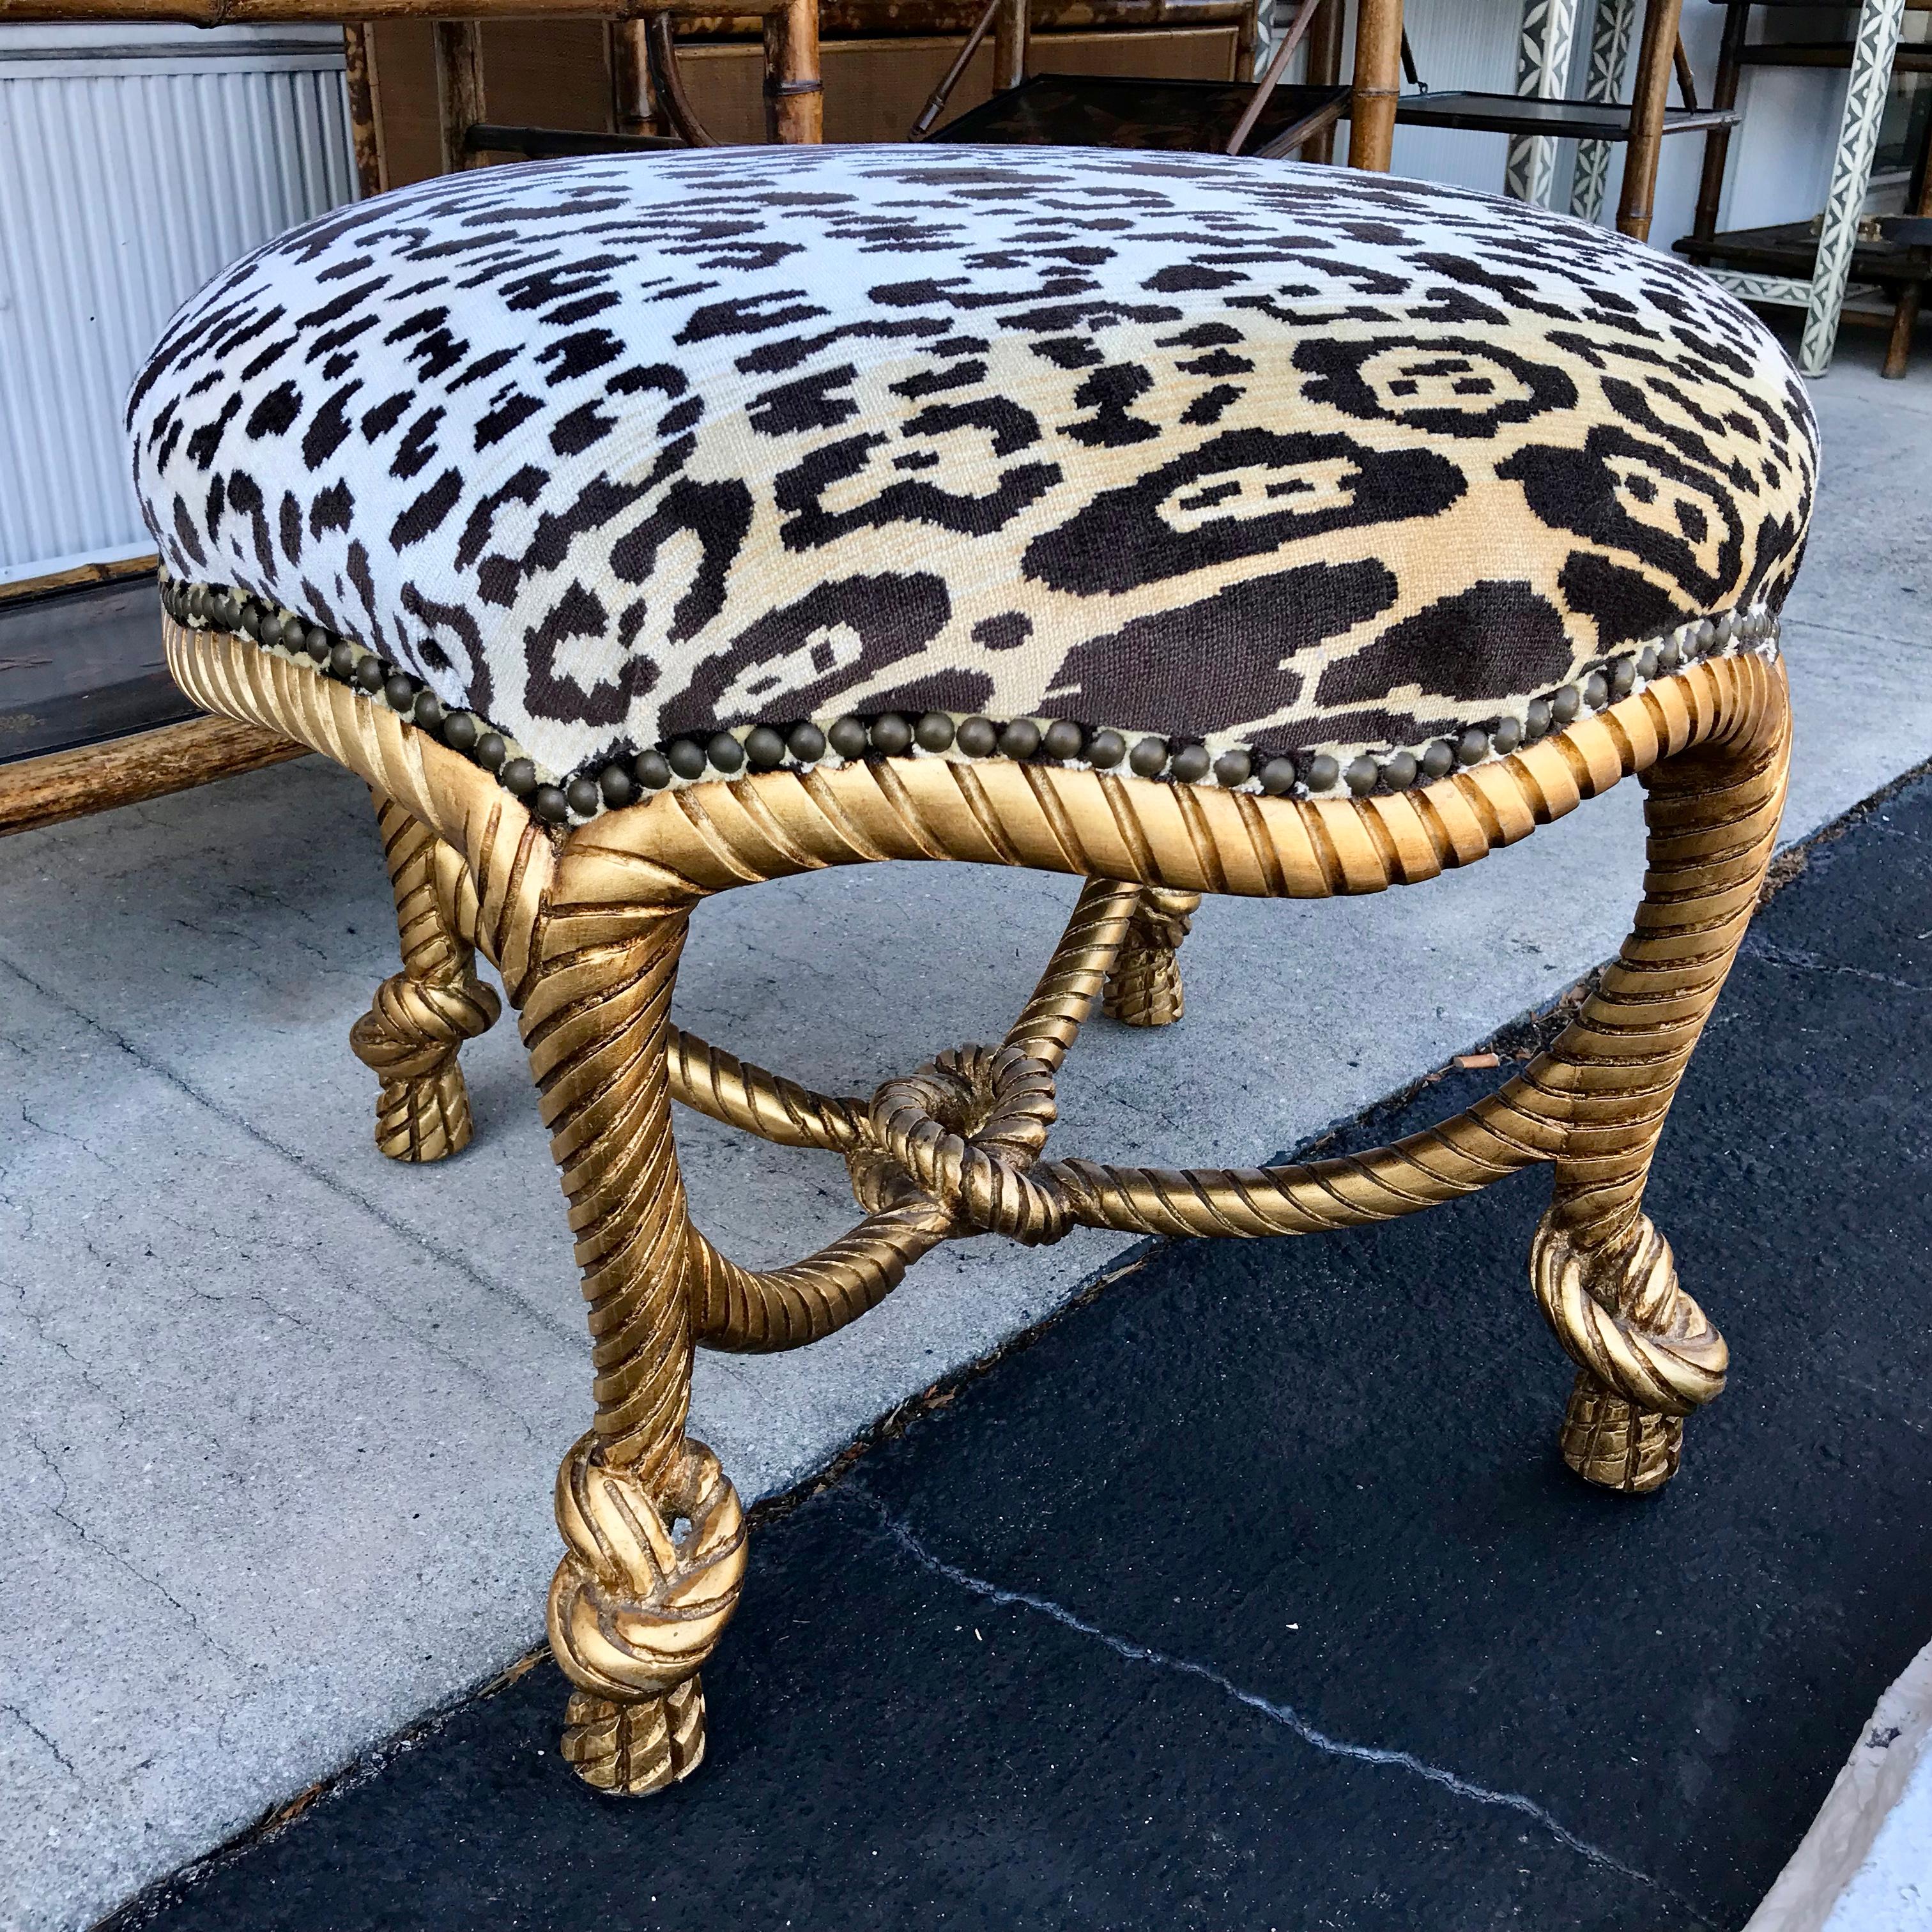 A beautifully and richly gilded bench. Outstanding style and proportions.
The bench is appointed with fabulous faux leopard seat covering.